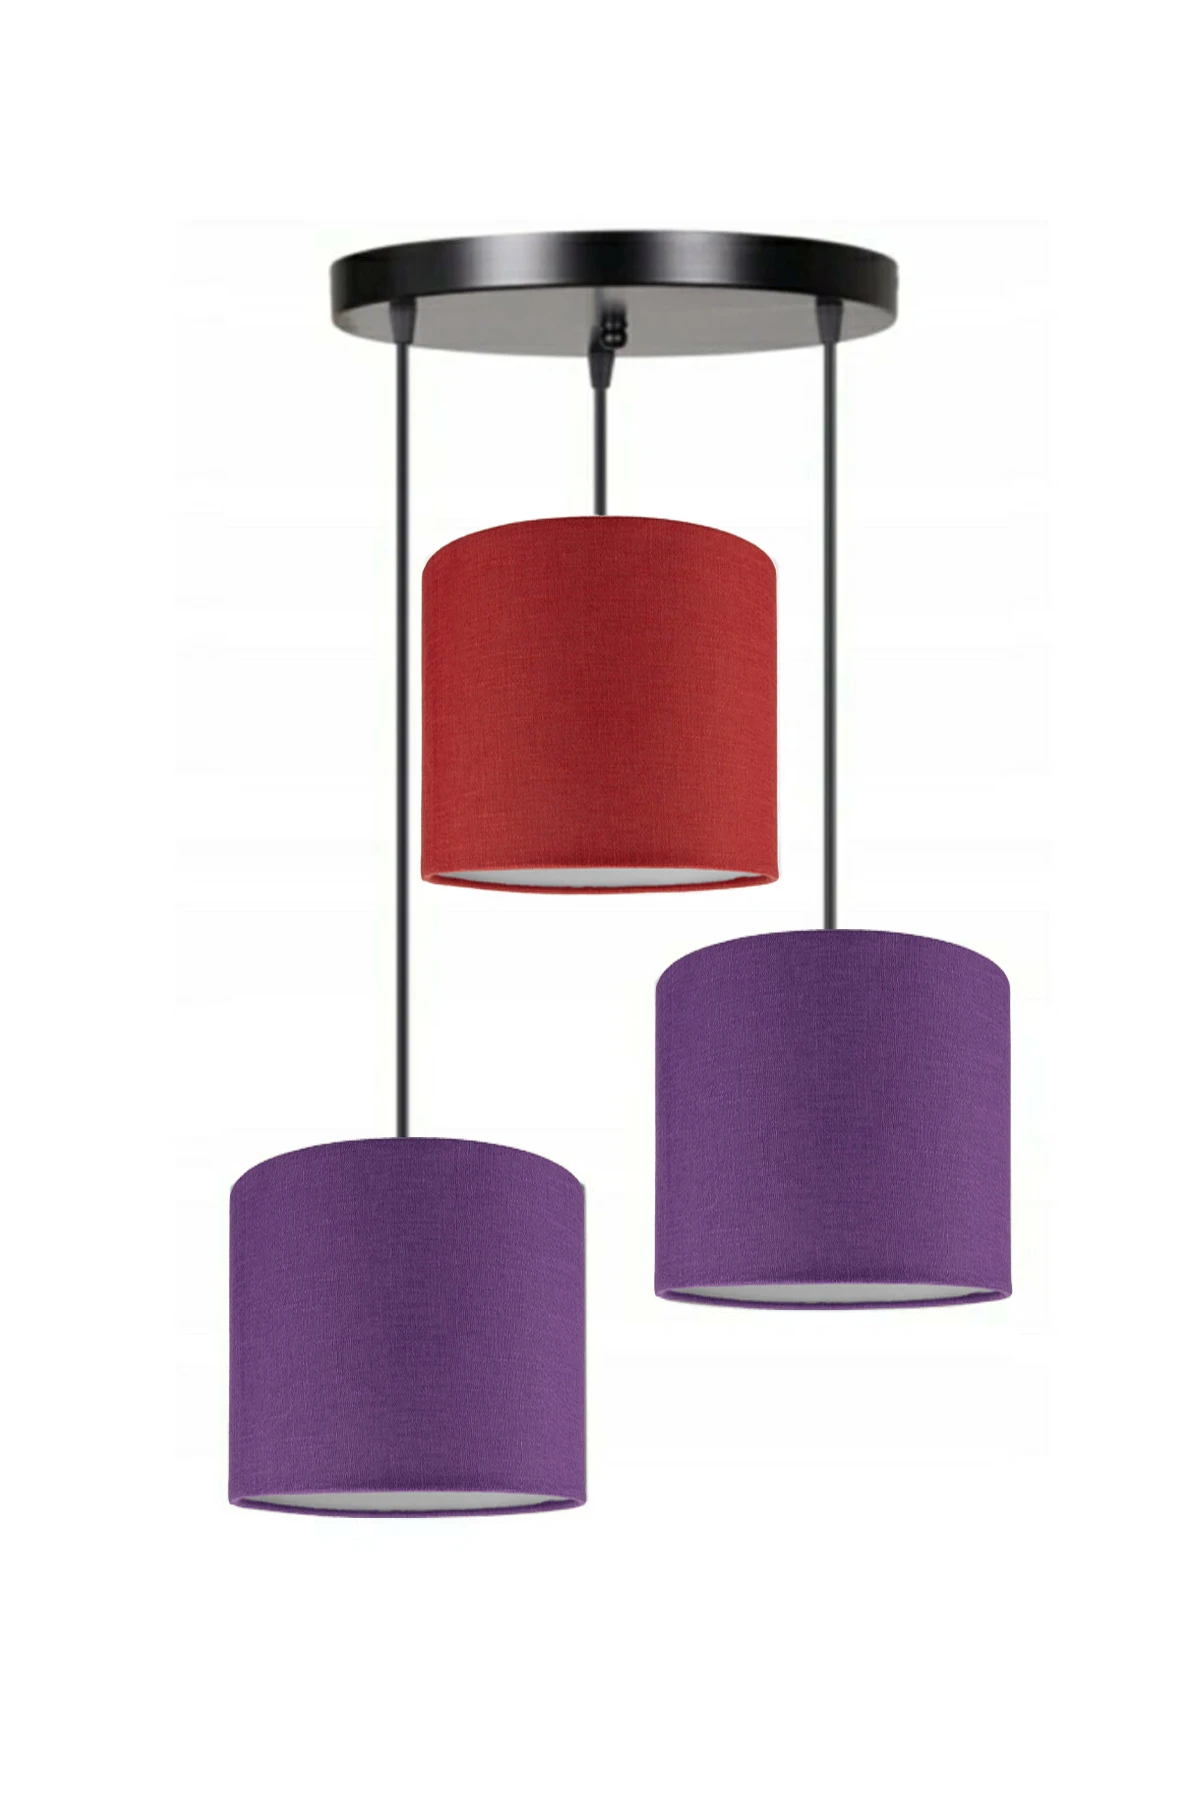 3 Heads 2 Purple 1 Red Cylinder Fabric Lampshade Pendant Lamp Chandelier Modern Decorative Design For Home Hotel Office Use